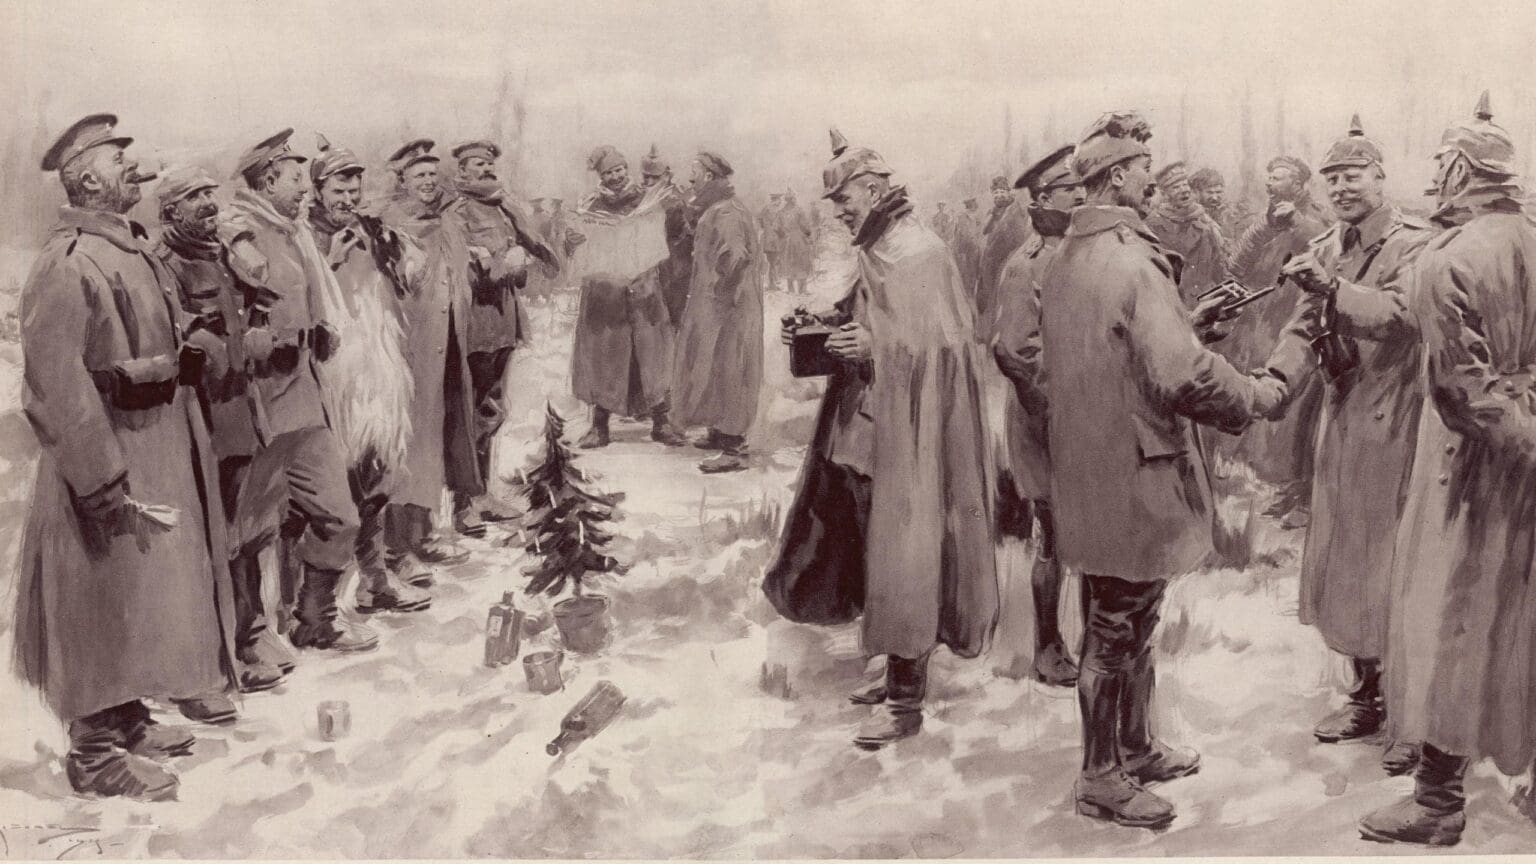 Ceasefire for Christmas: The 1914 Winter Truce